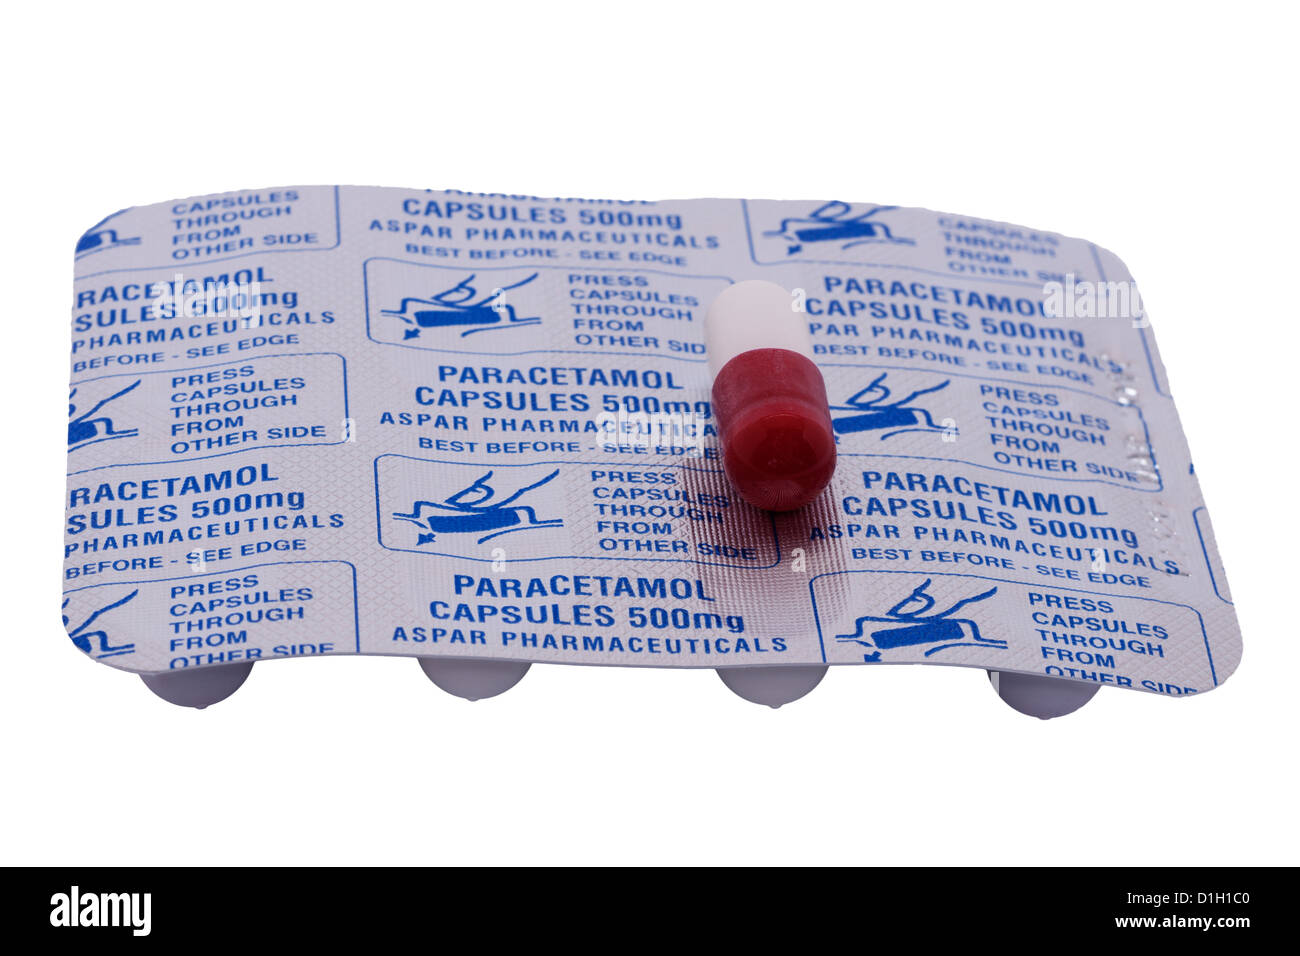 A blister pack of Paracetamol capsules for pain relief on a white background Stock Photo